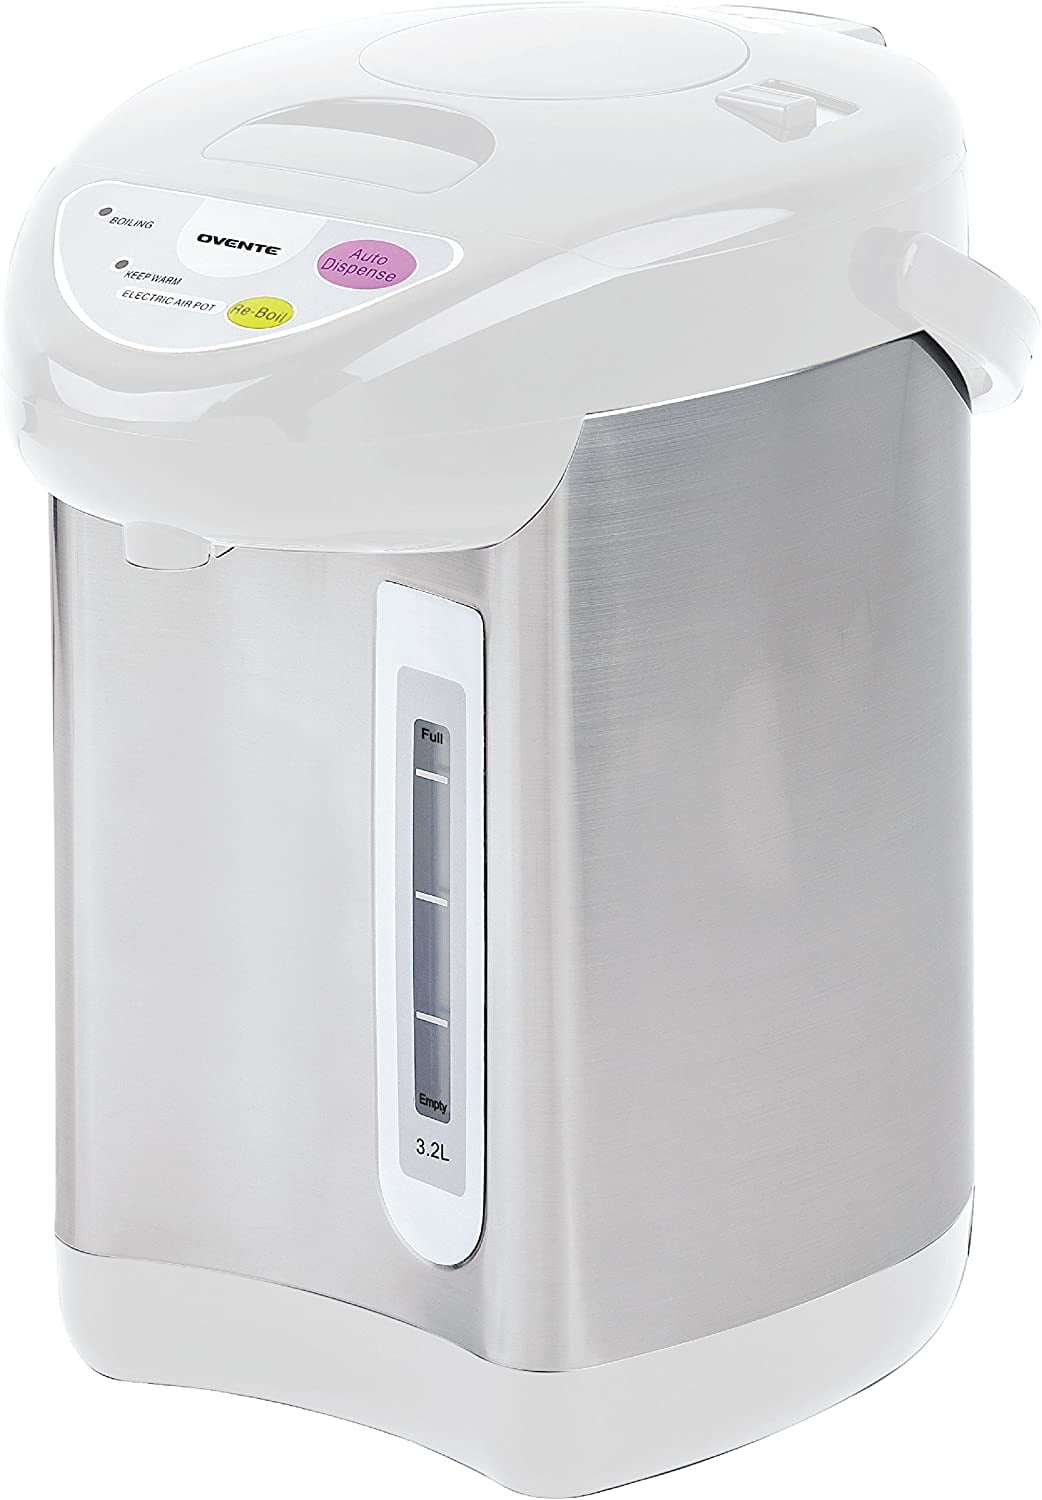 OVENTE Electric Stainless Steel Insulated Hot Water Boiler and